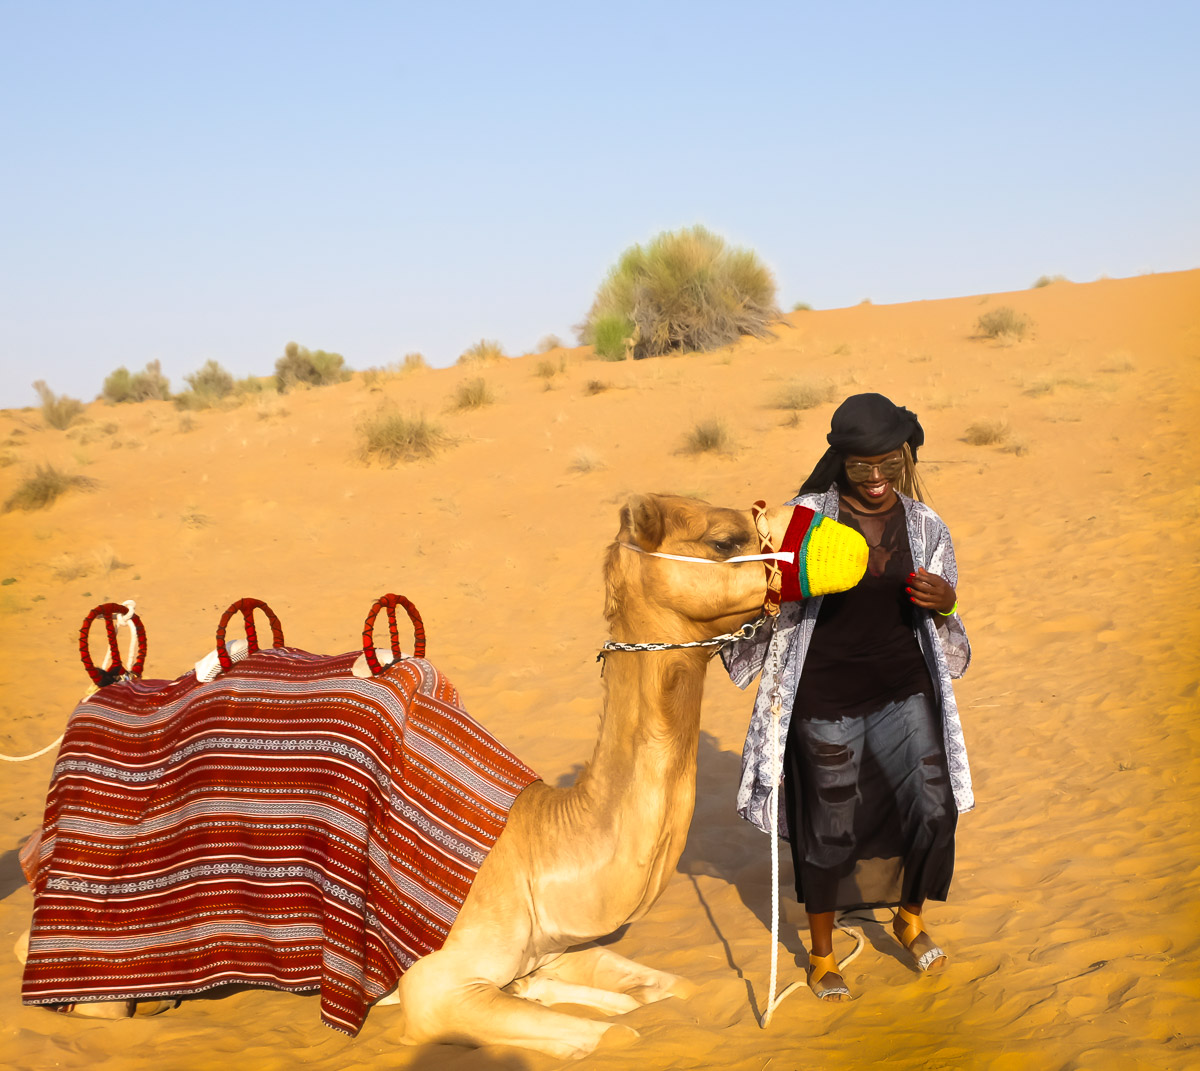 Me and camel.jpg